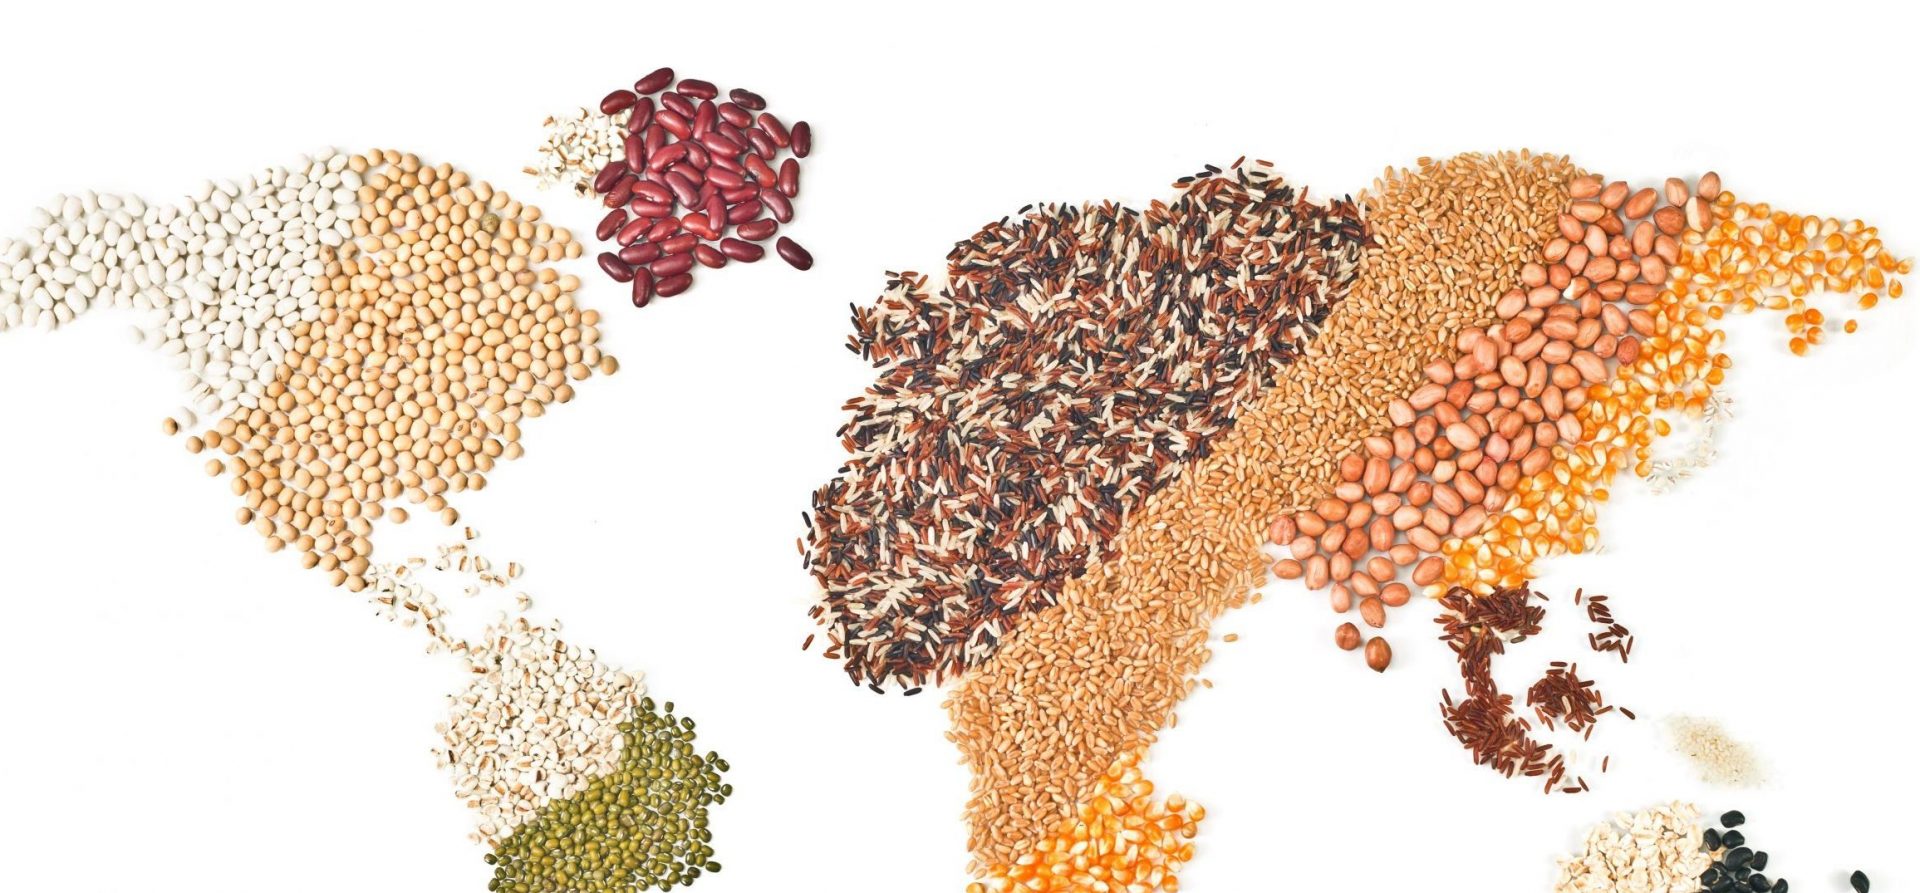 Foods seeds in shape of Earth continents on a white Background